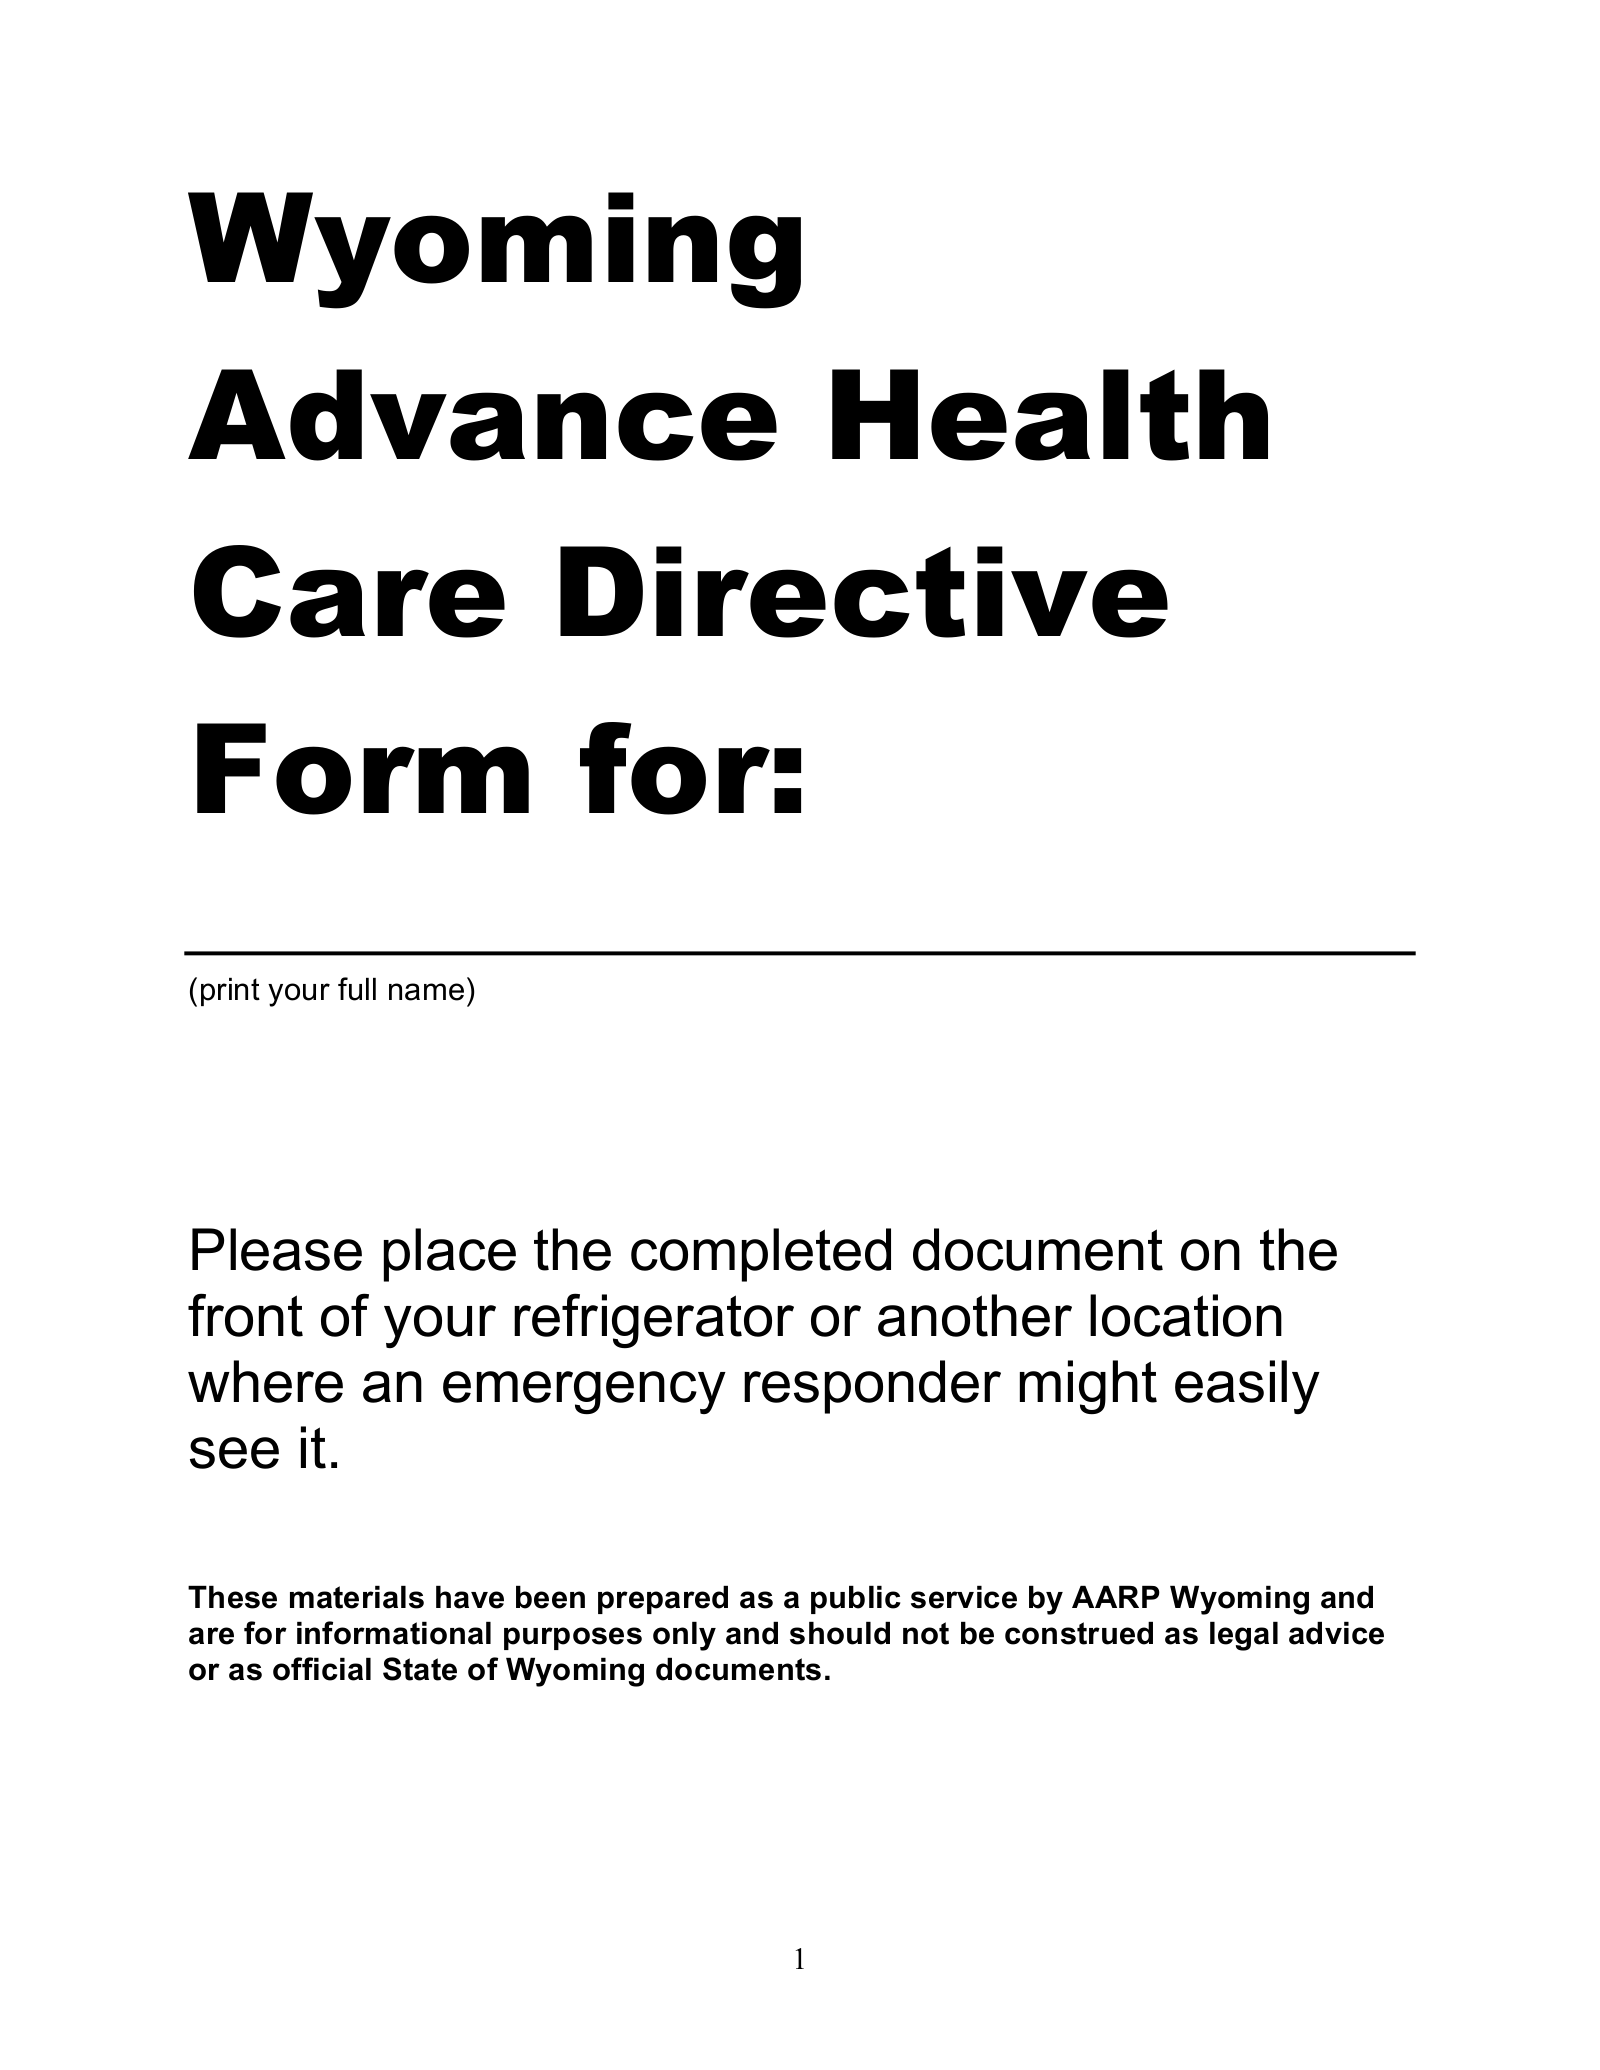 Wyoming Advance Directive Form